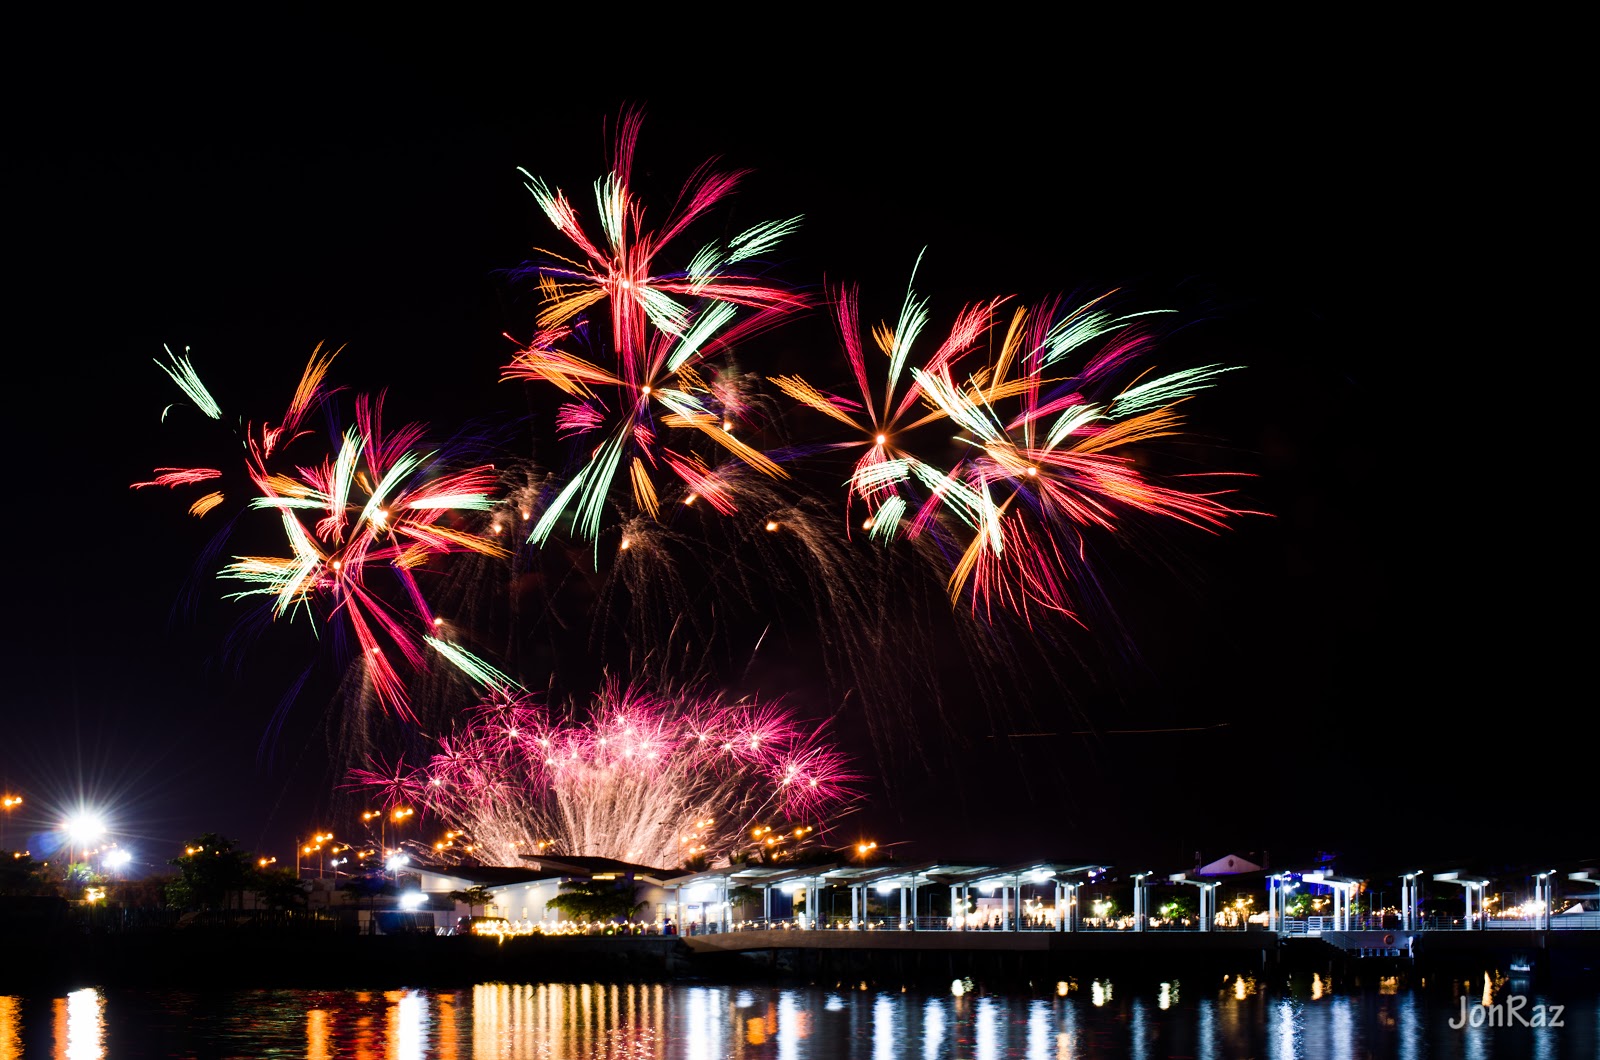 Capturing Fireworks That Paint The Sky